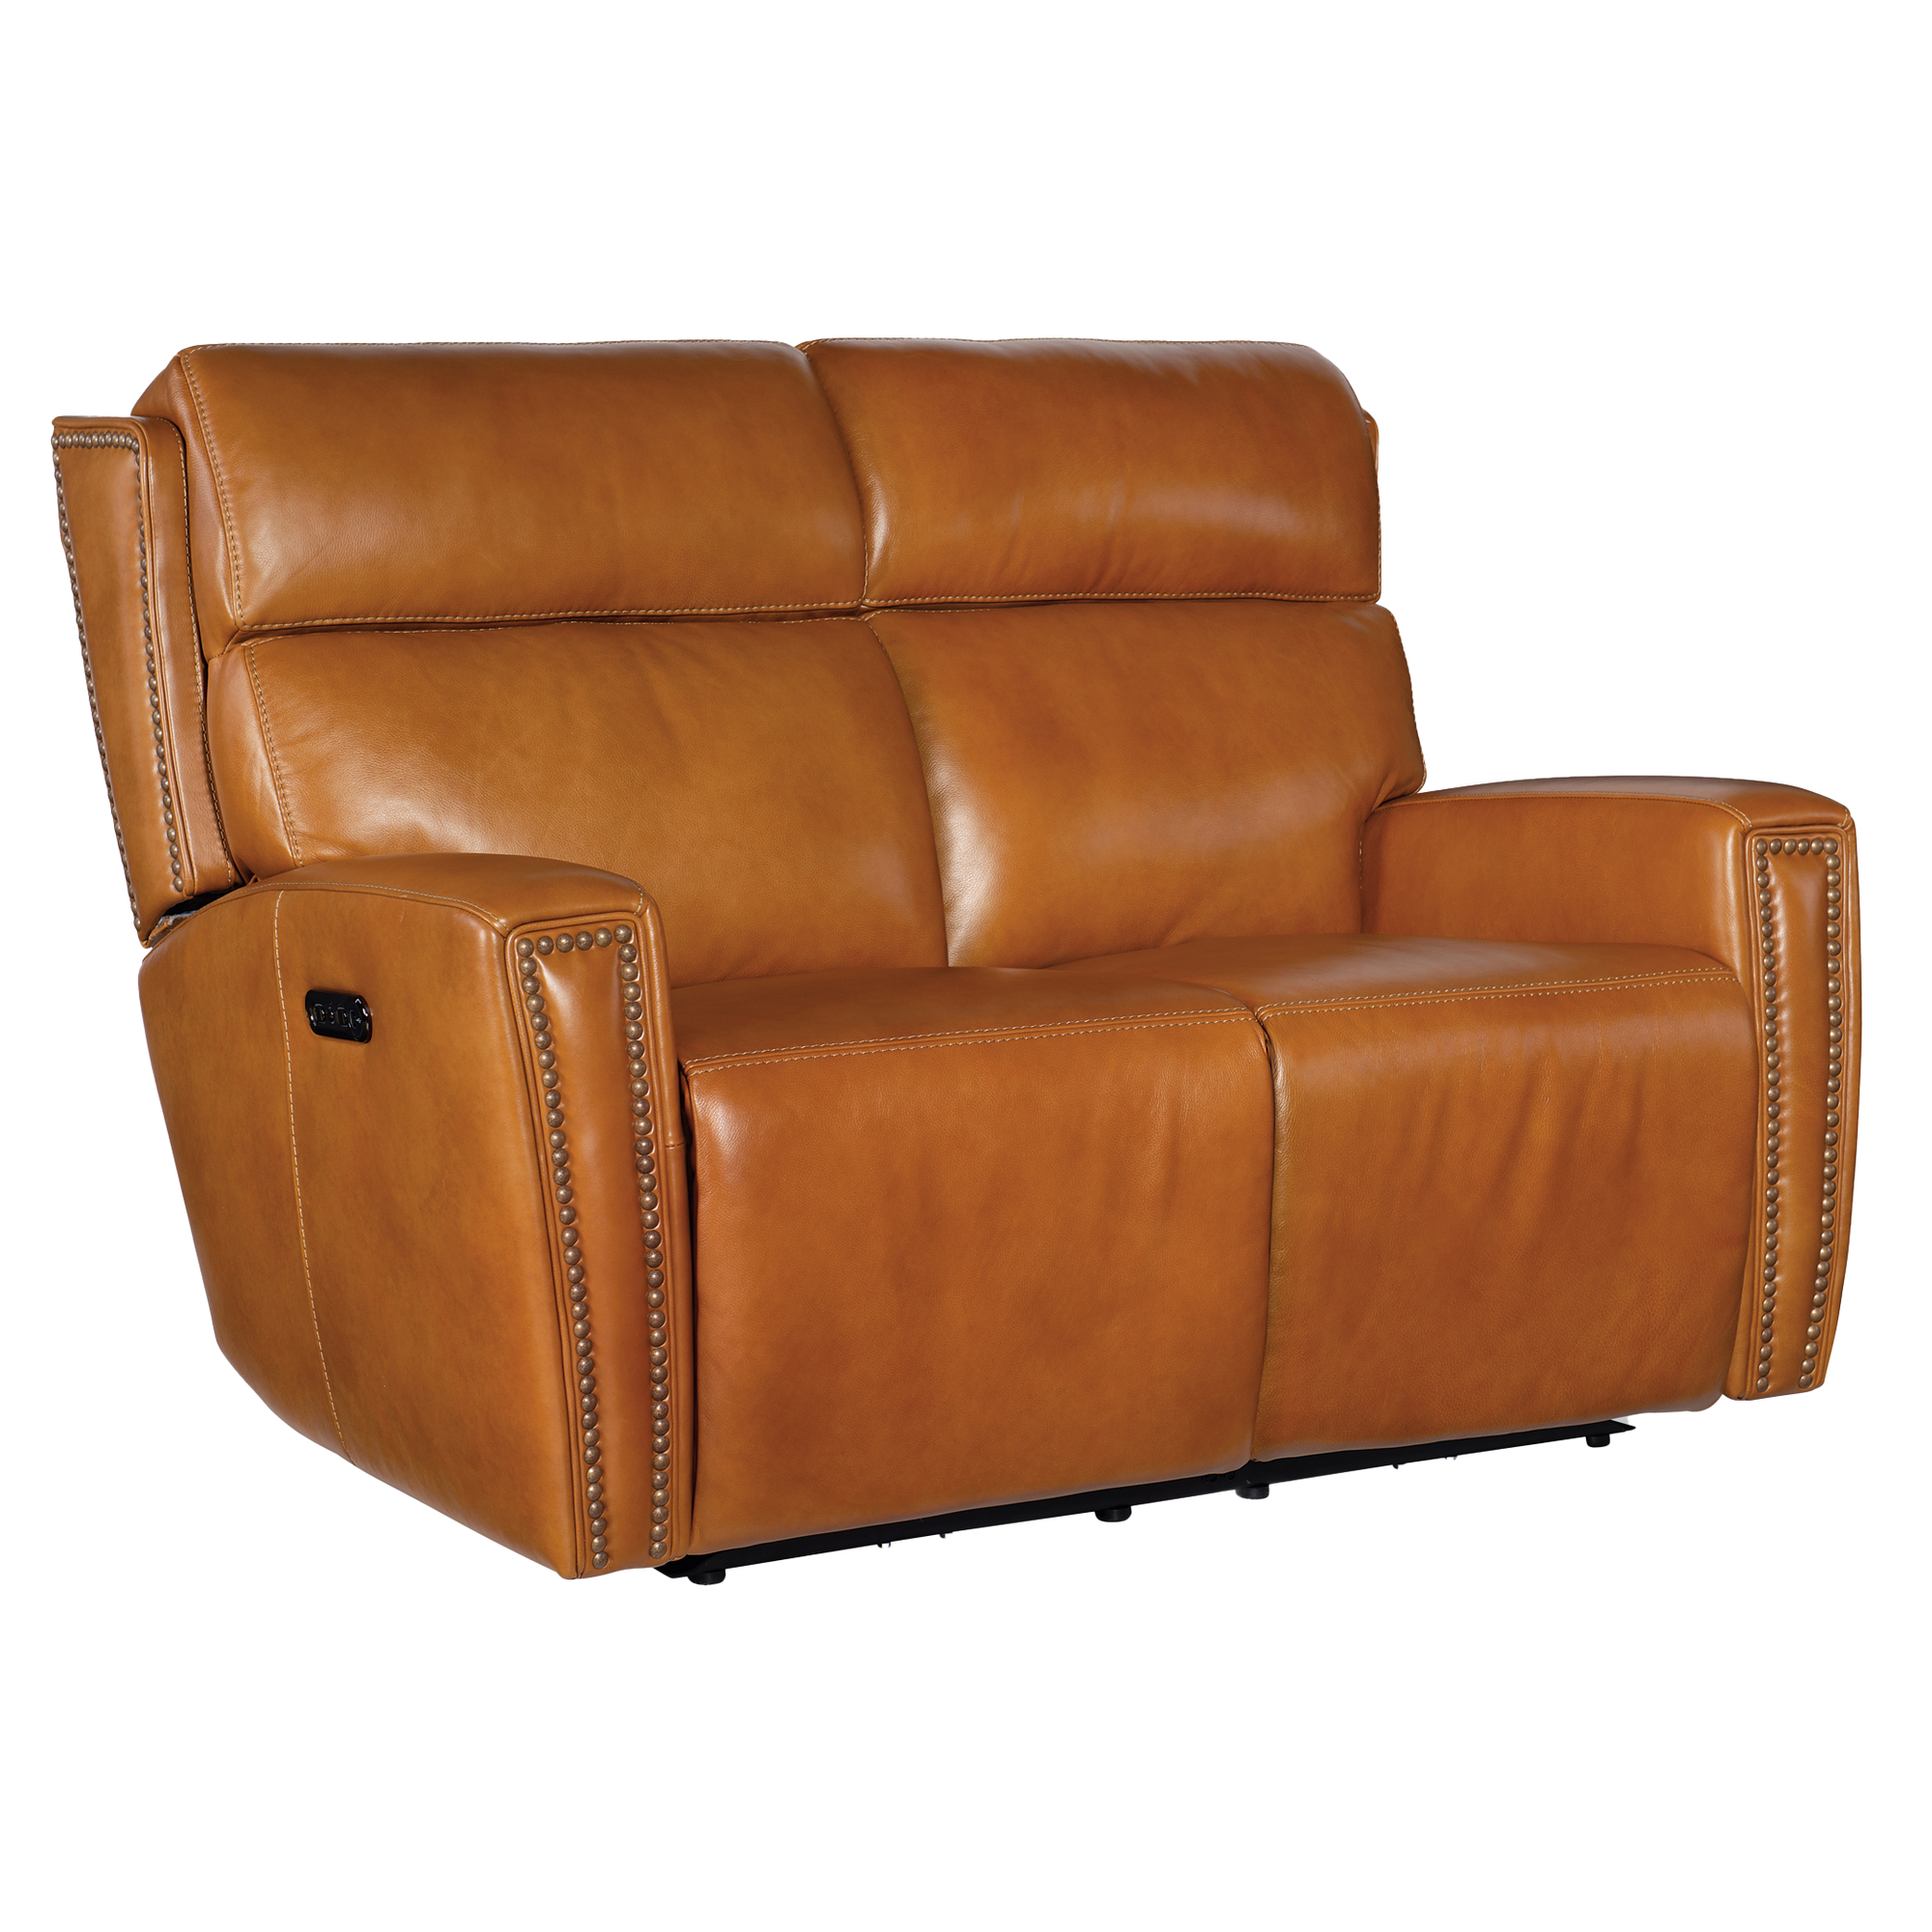 Raffy 58.5" Wide Upholstered Leather Loveseat